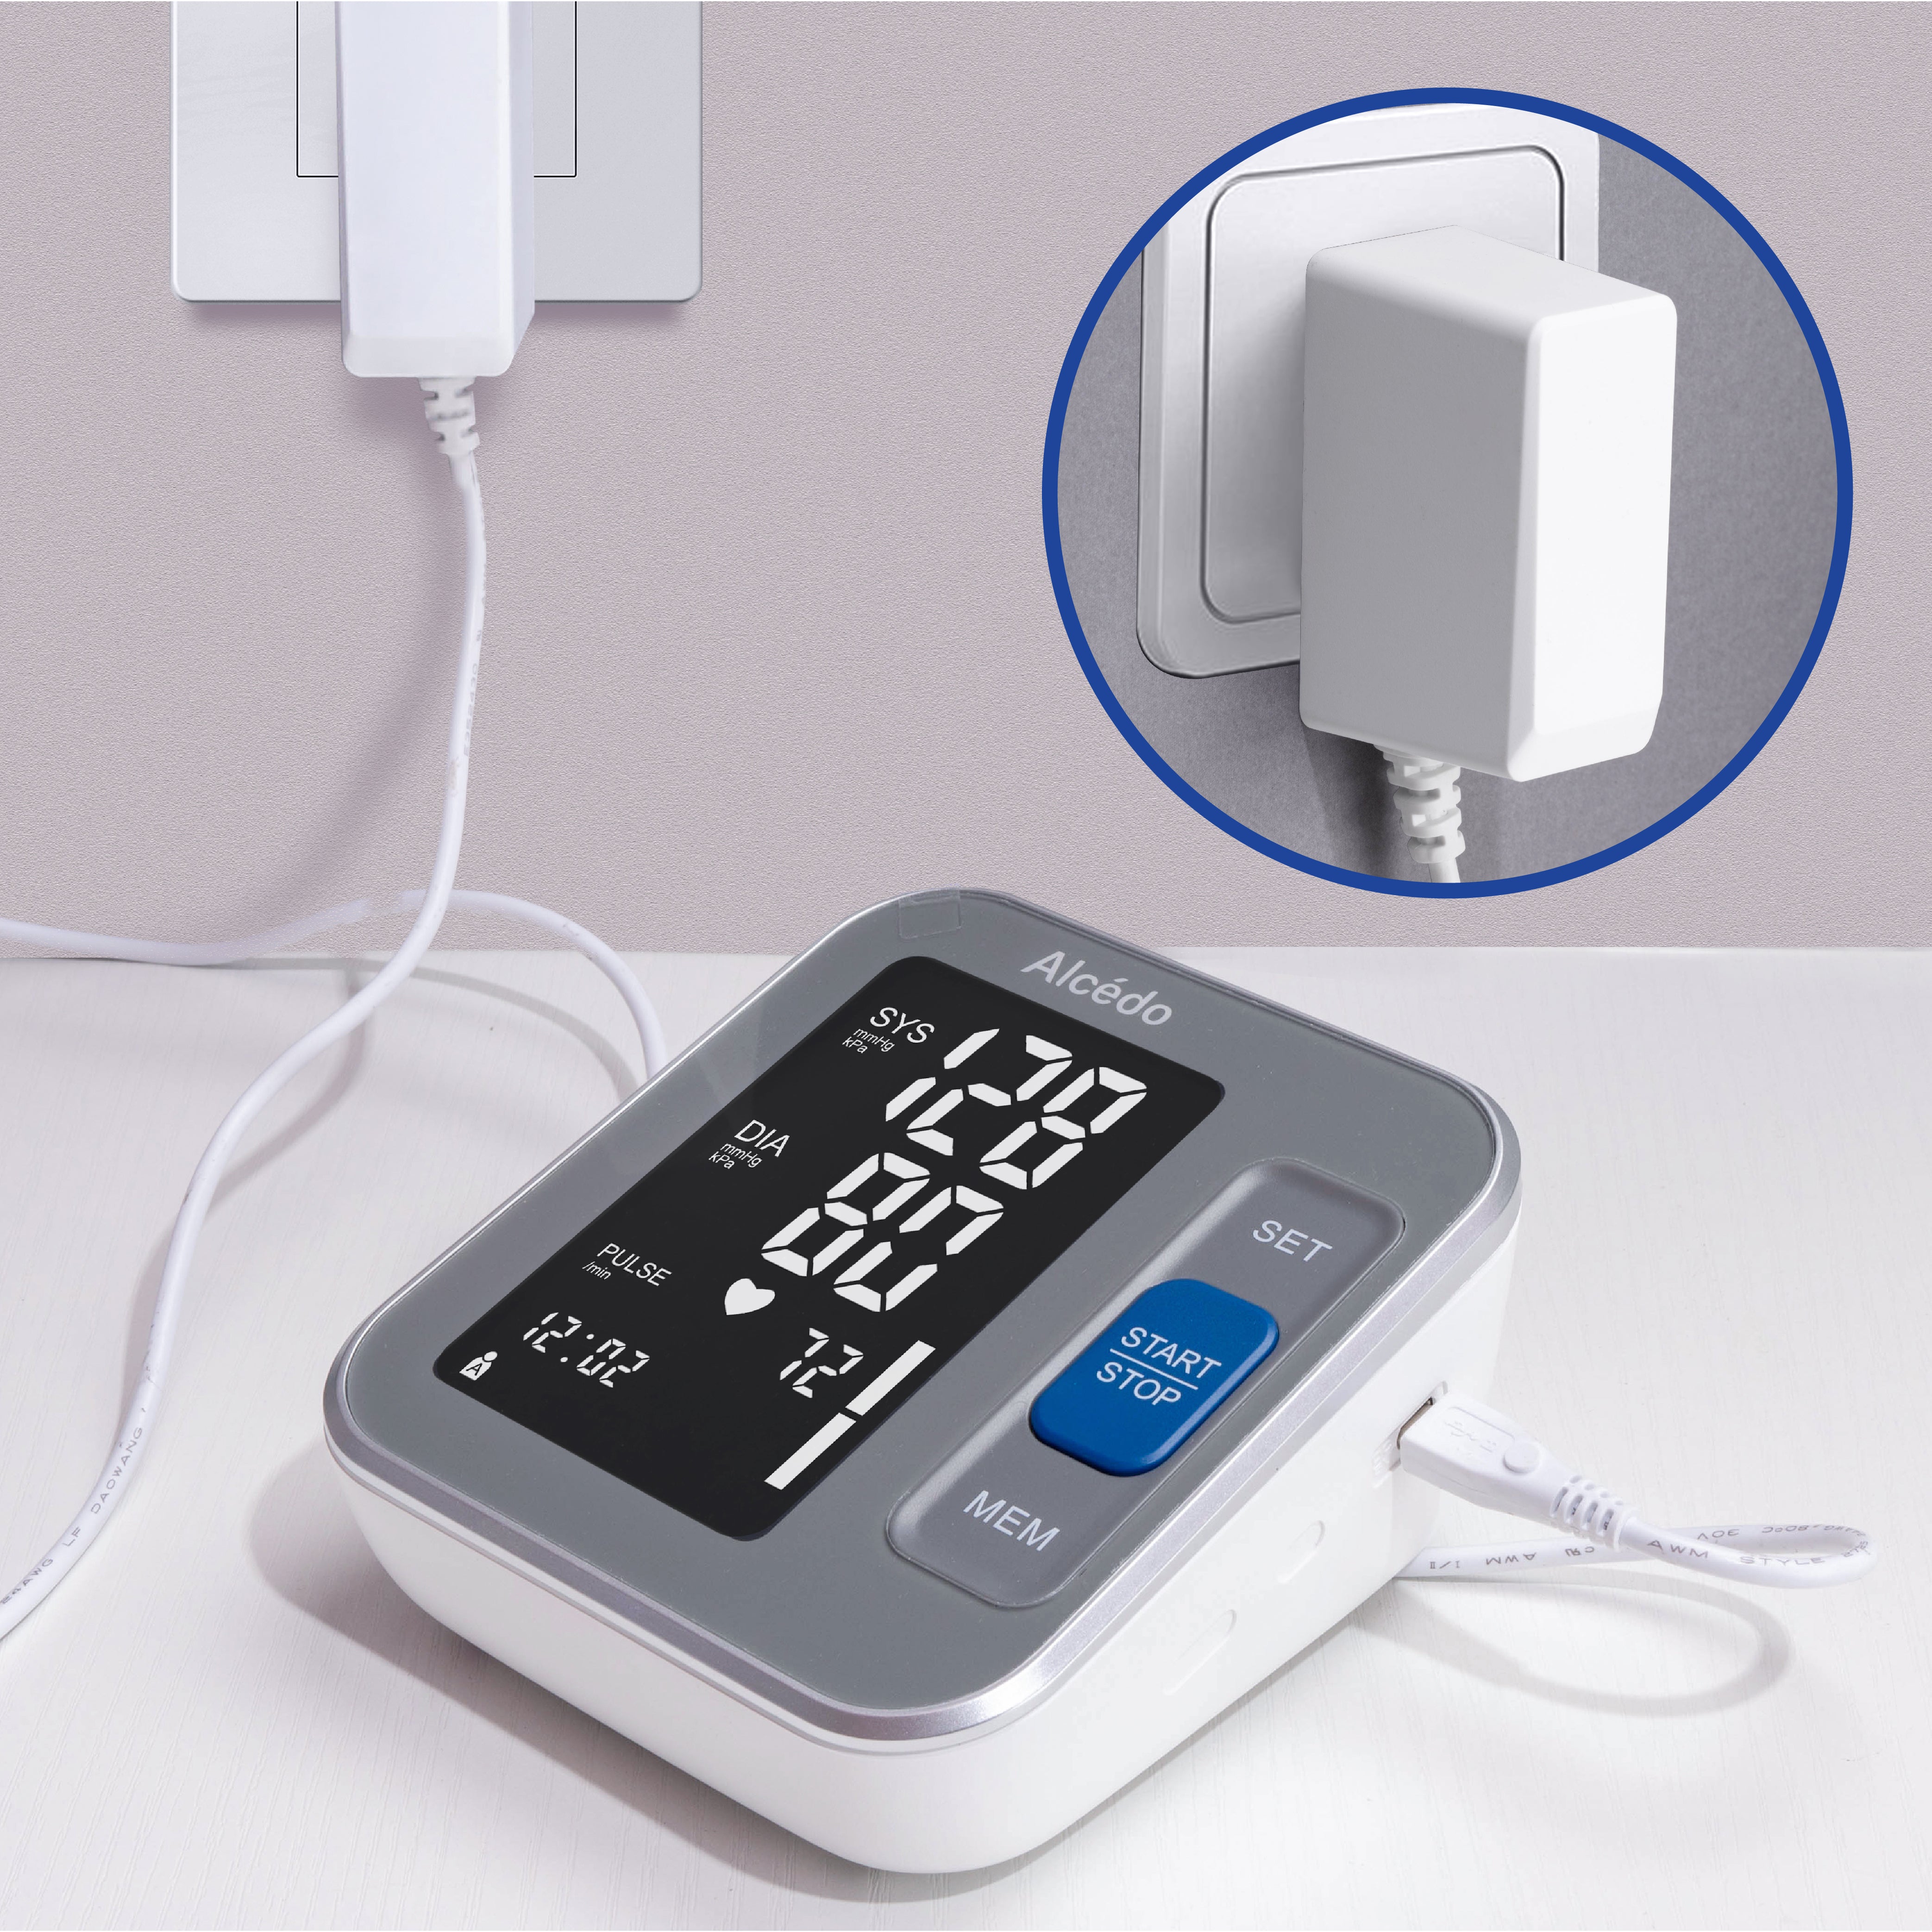 blood pressure monitors power adapter for Medical Uses 